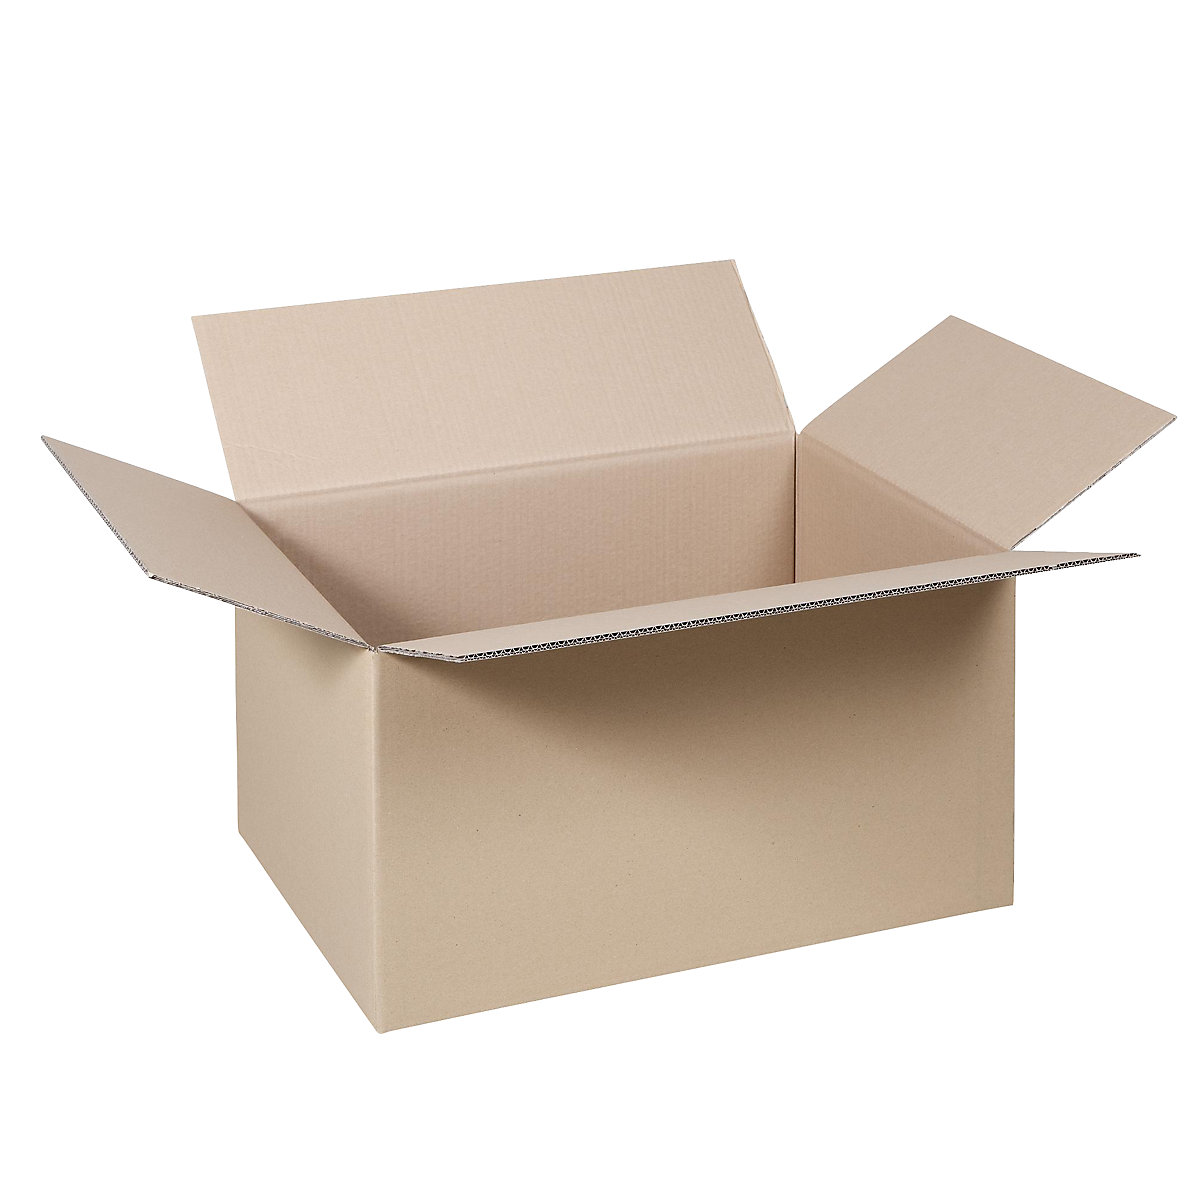 Folding cardboard box, FEFCO 0201, made of double fluted cardboard, internal dimensions 300 x 200 x 170 mm, pack of 100-4